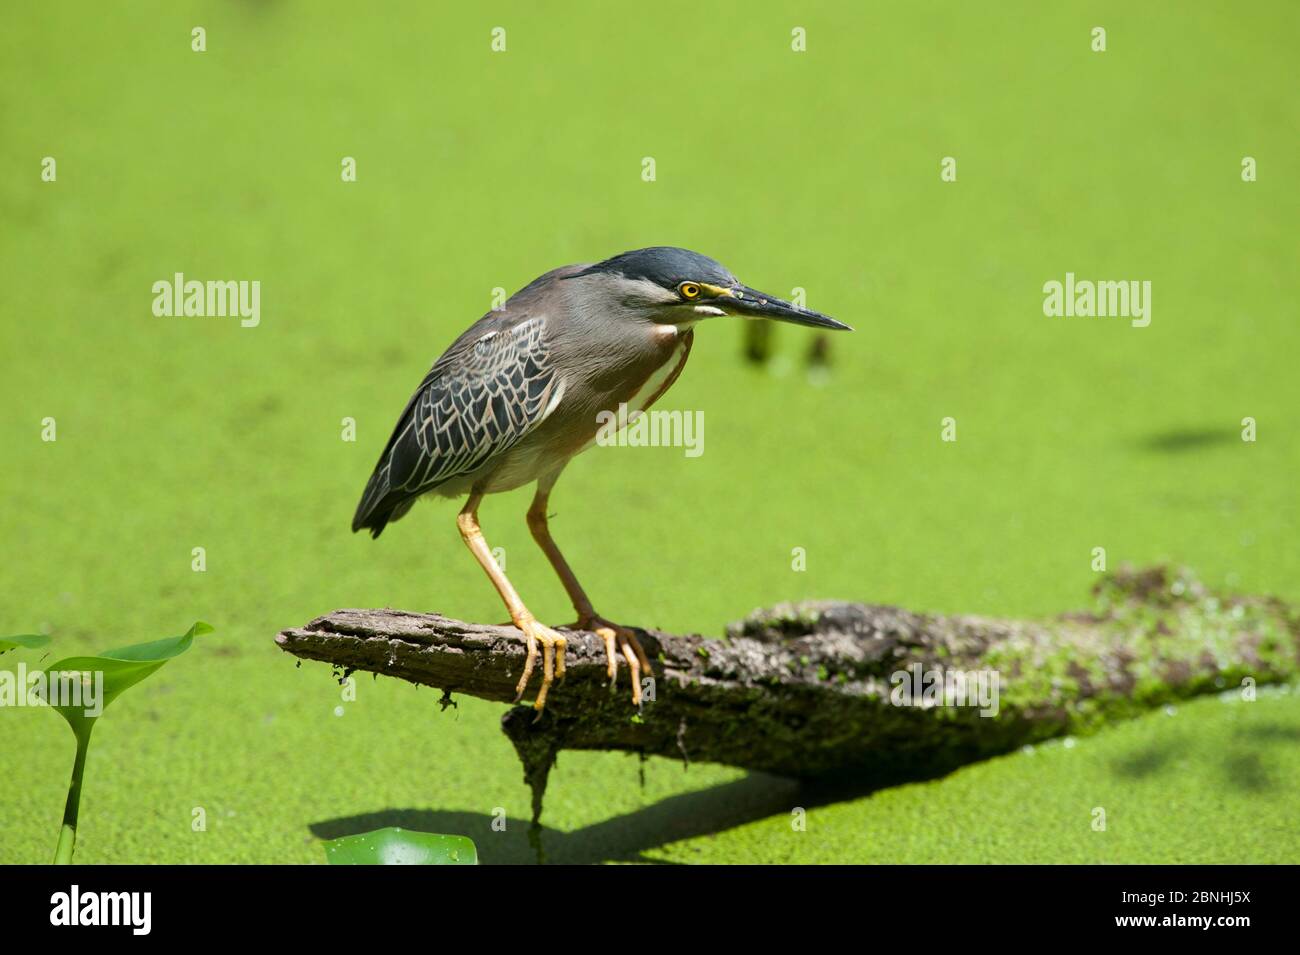 Green-backed Heron (Butorides striatus) or Striated Heron, fishing in swamp.Cayenne, French Guiana.  July. Stock Photo